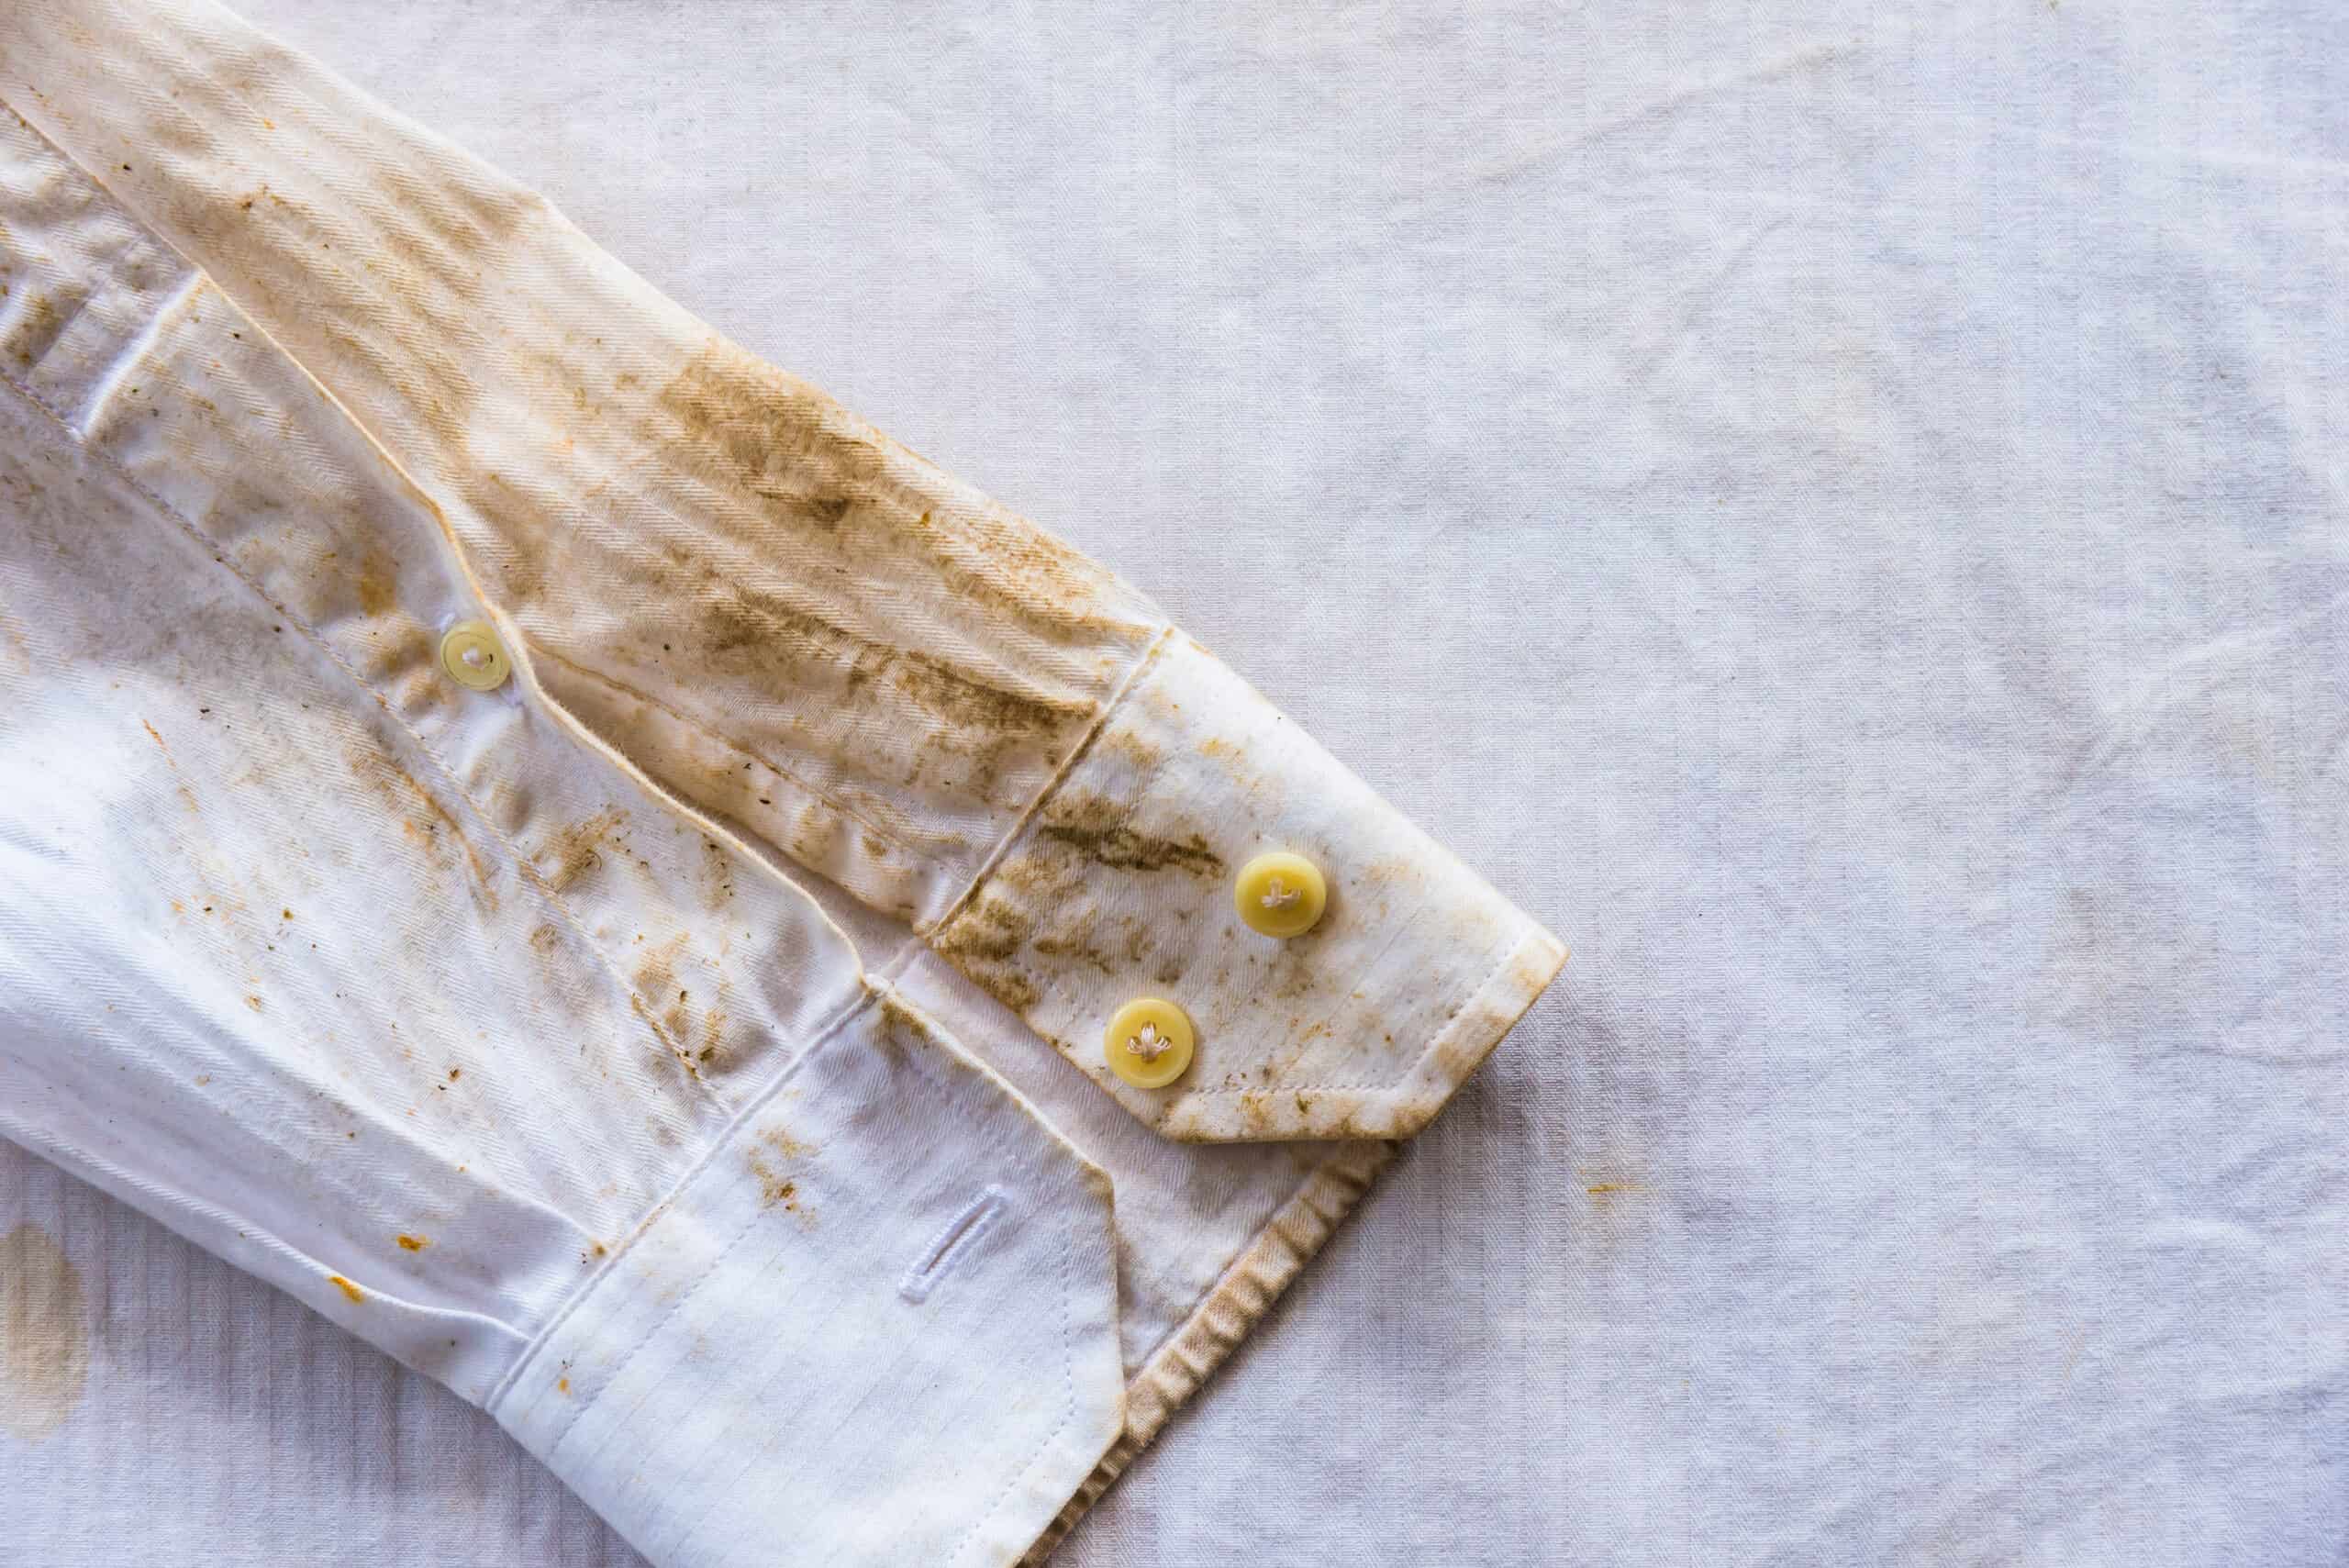 How to remove rust stains from clothes? 4 convenient tips